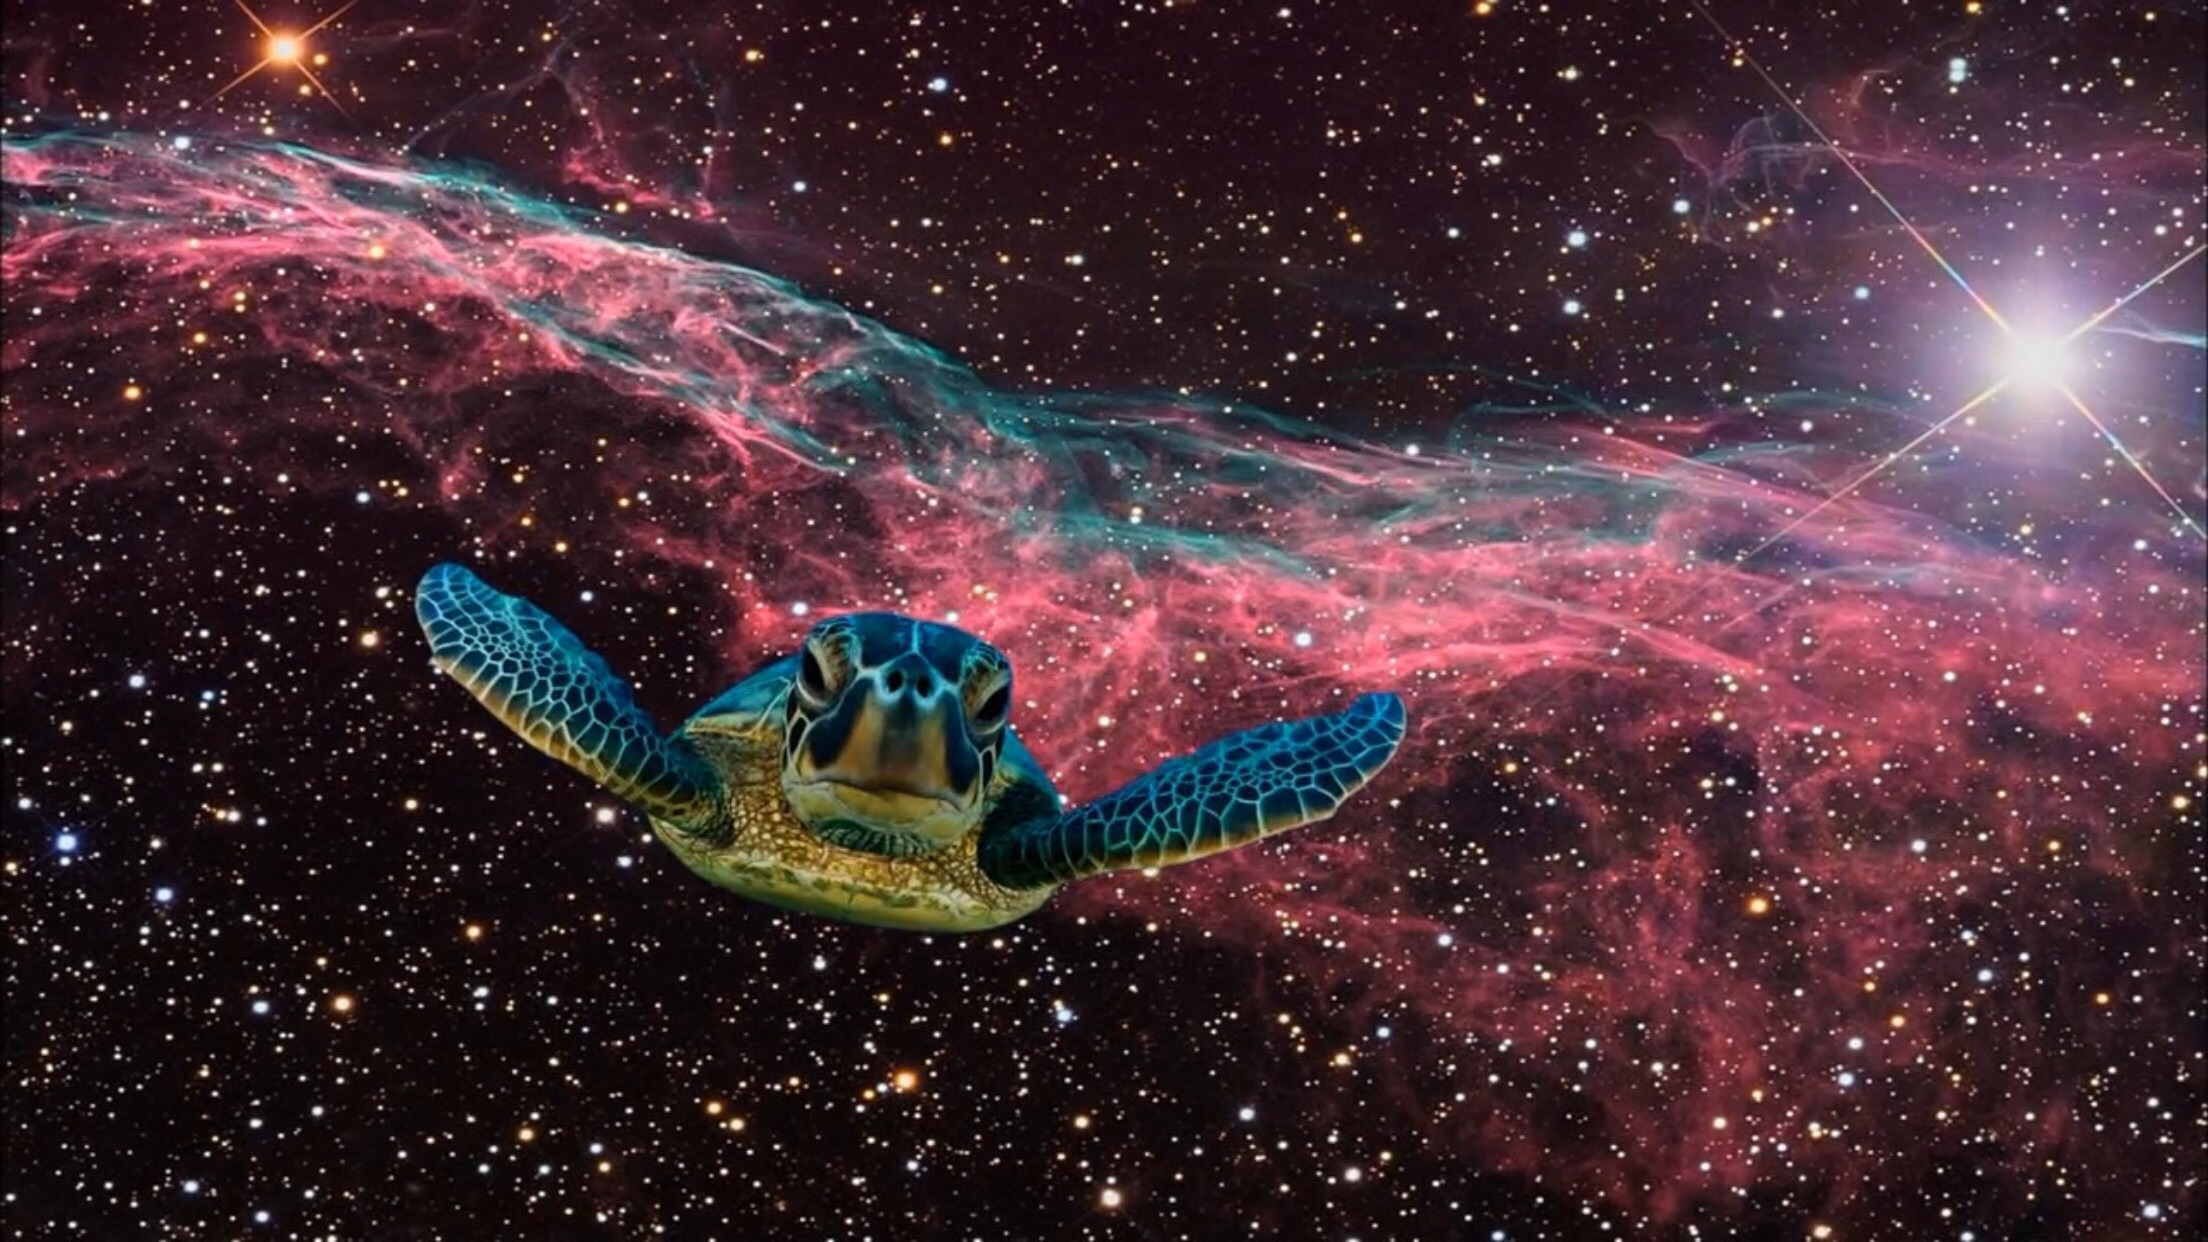 a sea turtle photoshopped onto a photo of a galaxy in space